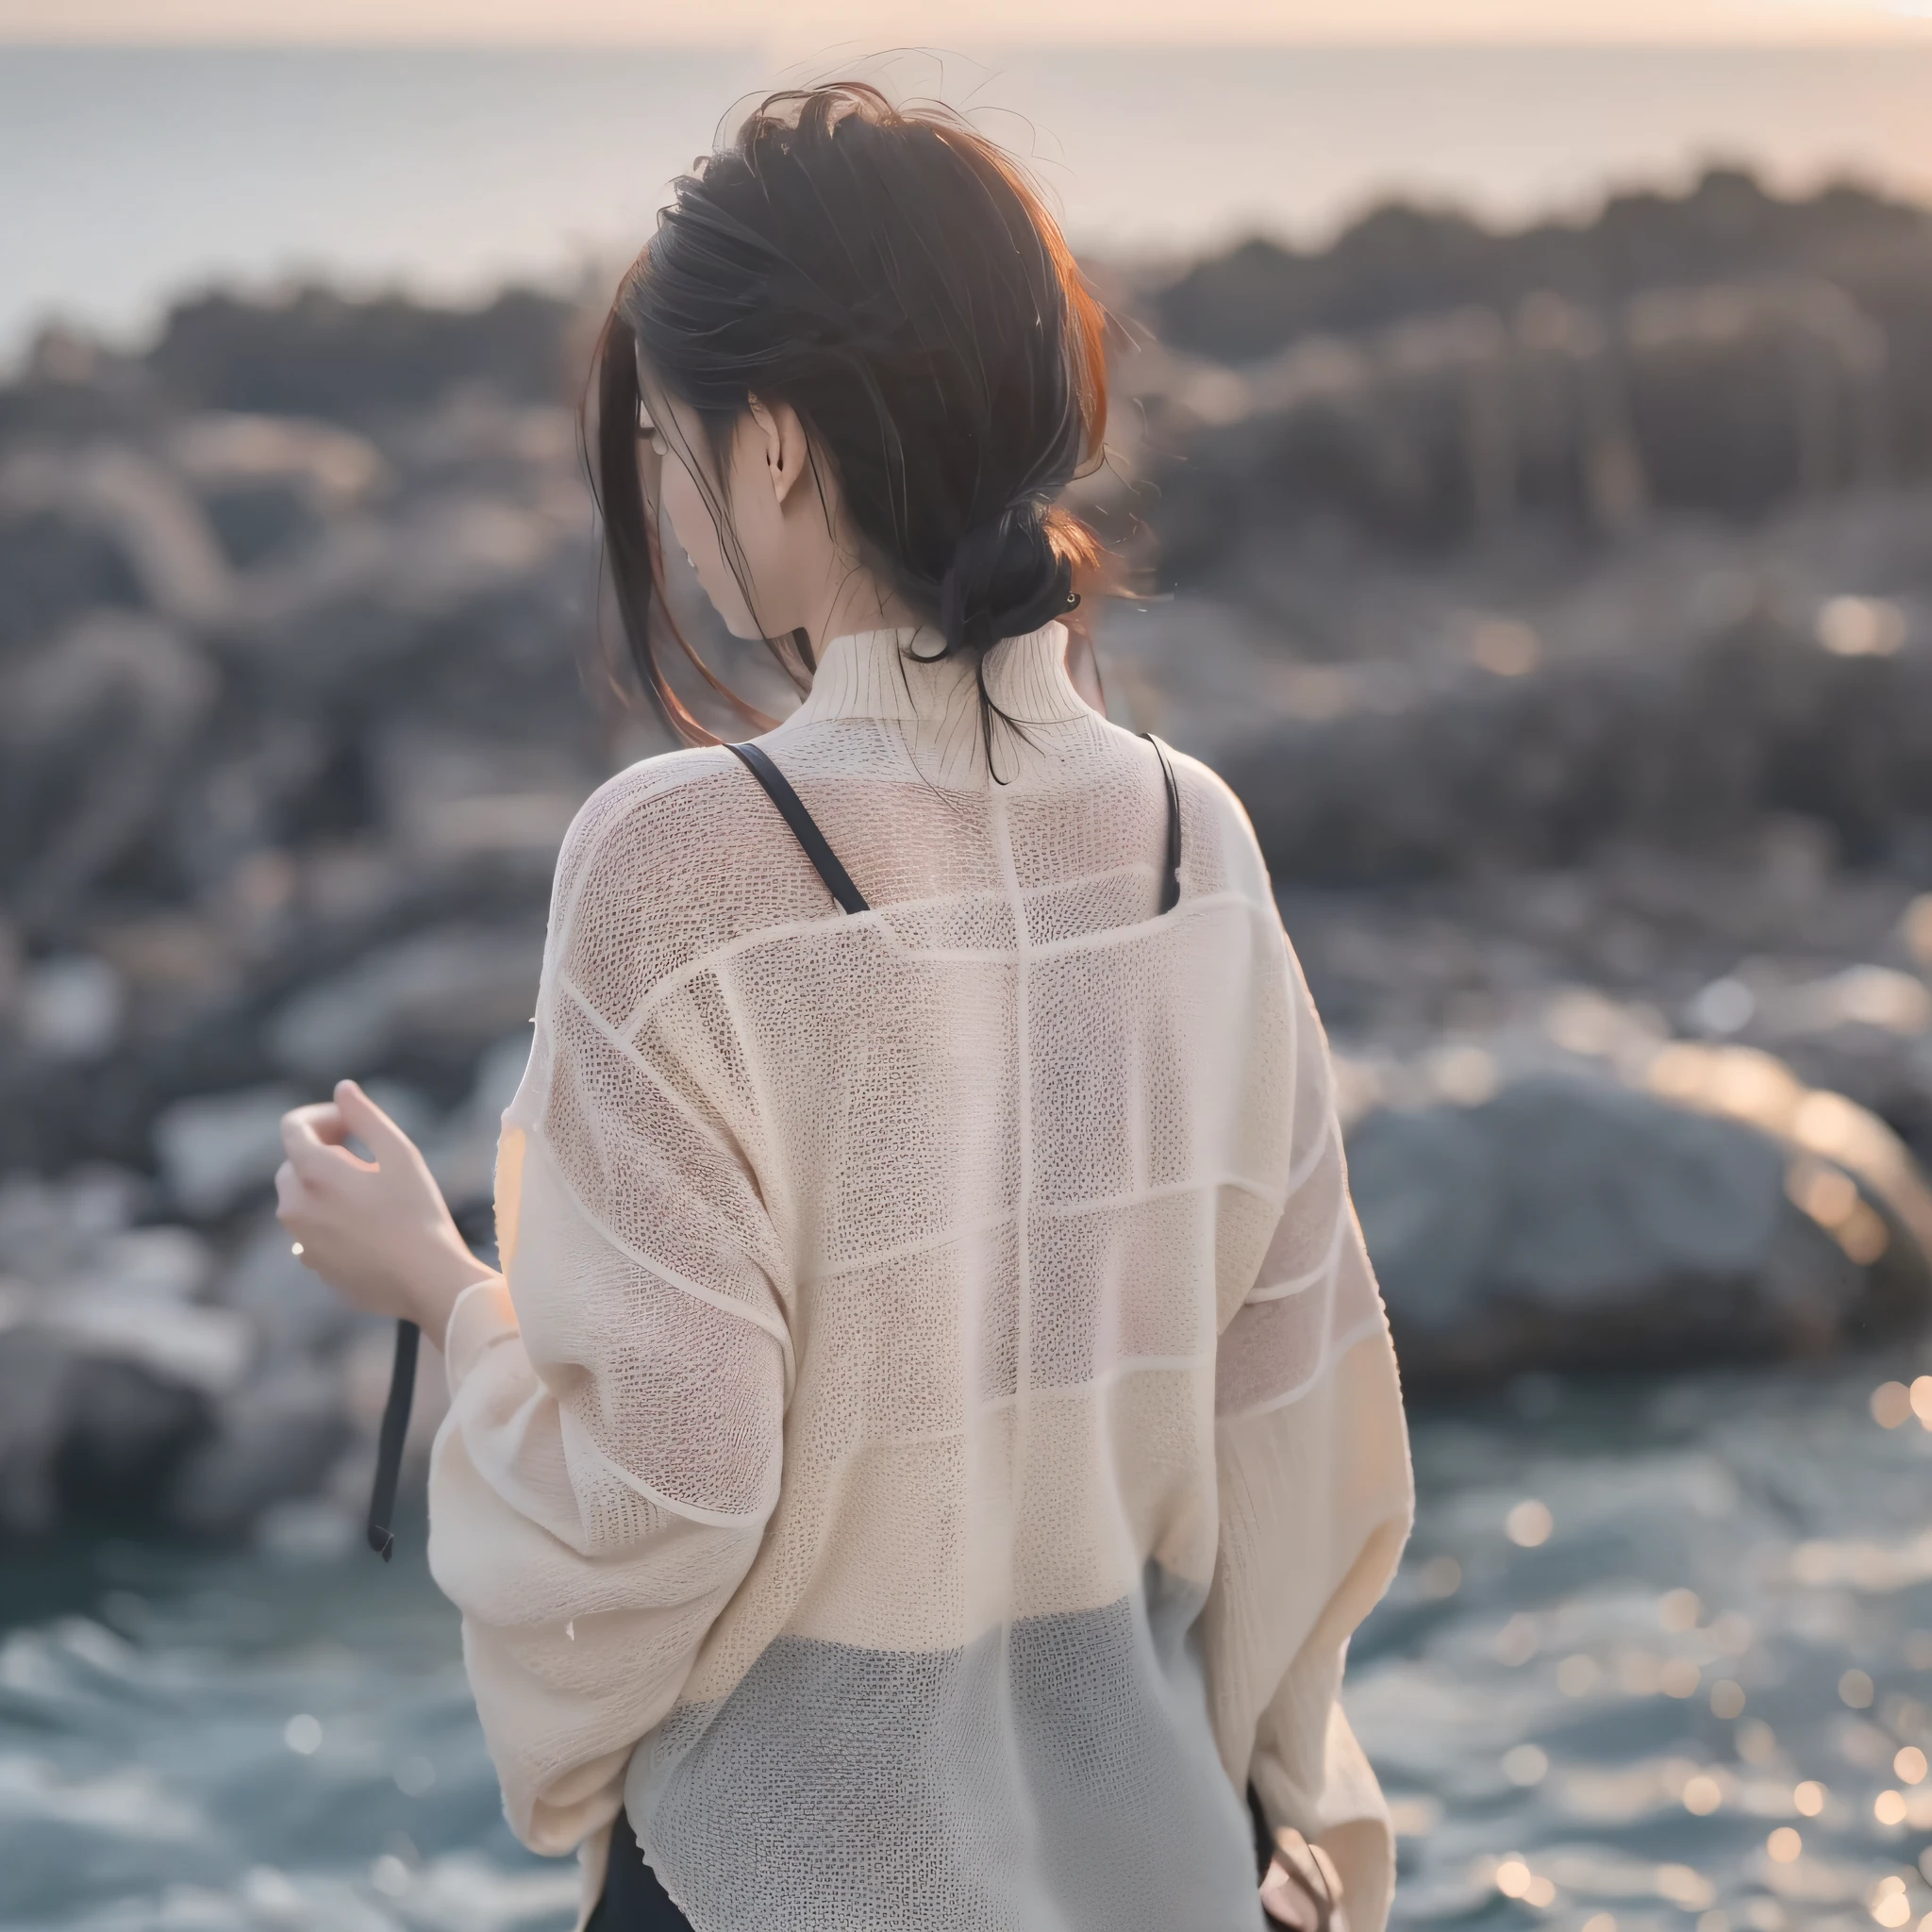 A beautiful woman watching the sunset by the sea, black hair, attention to detail, to see hands in black and white clothes standing with their backs